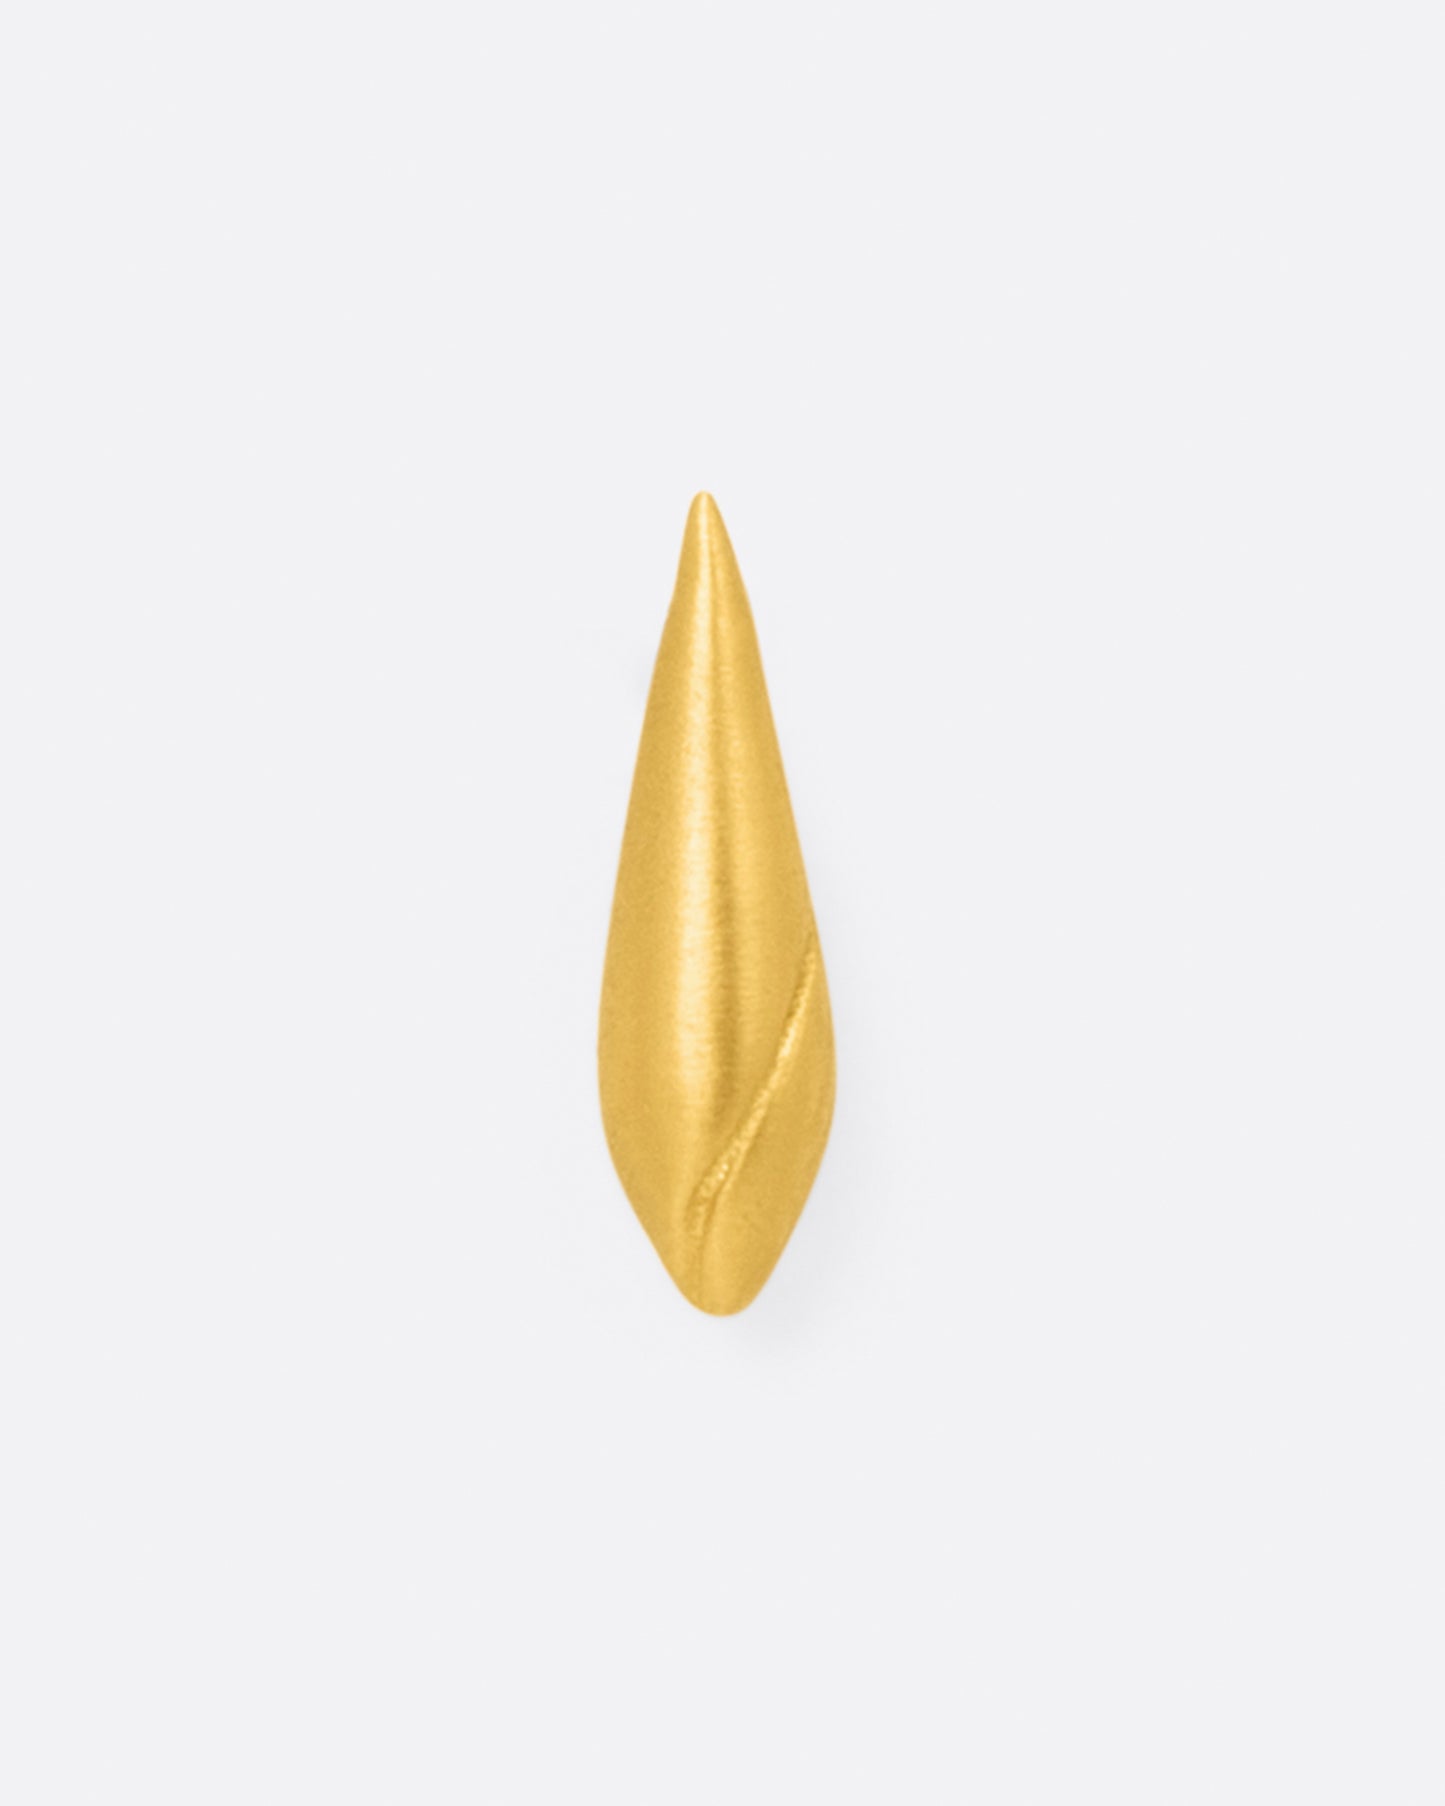 A cone shaped 22k yellow gold stud earring with a line following the curve of the earring, shown from the front.